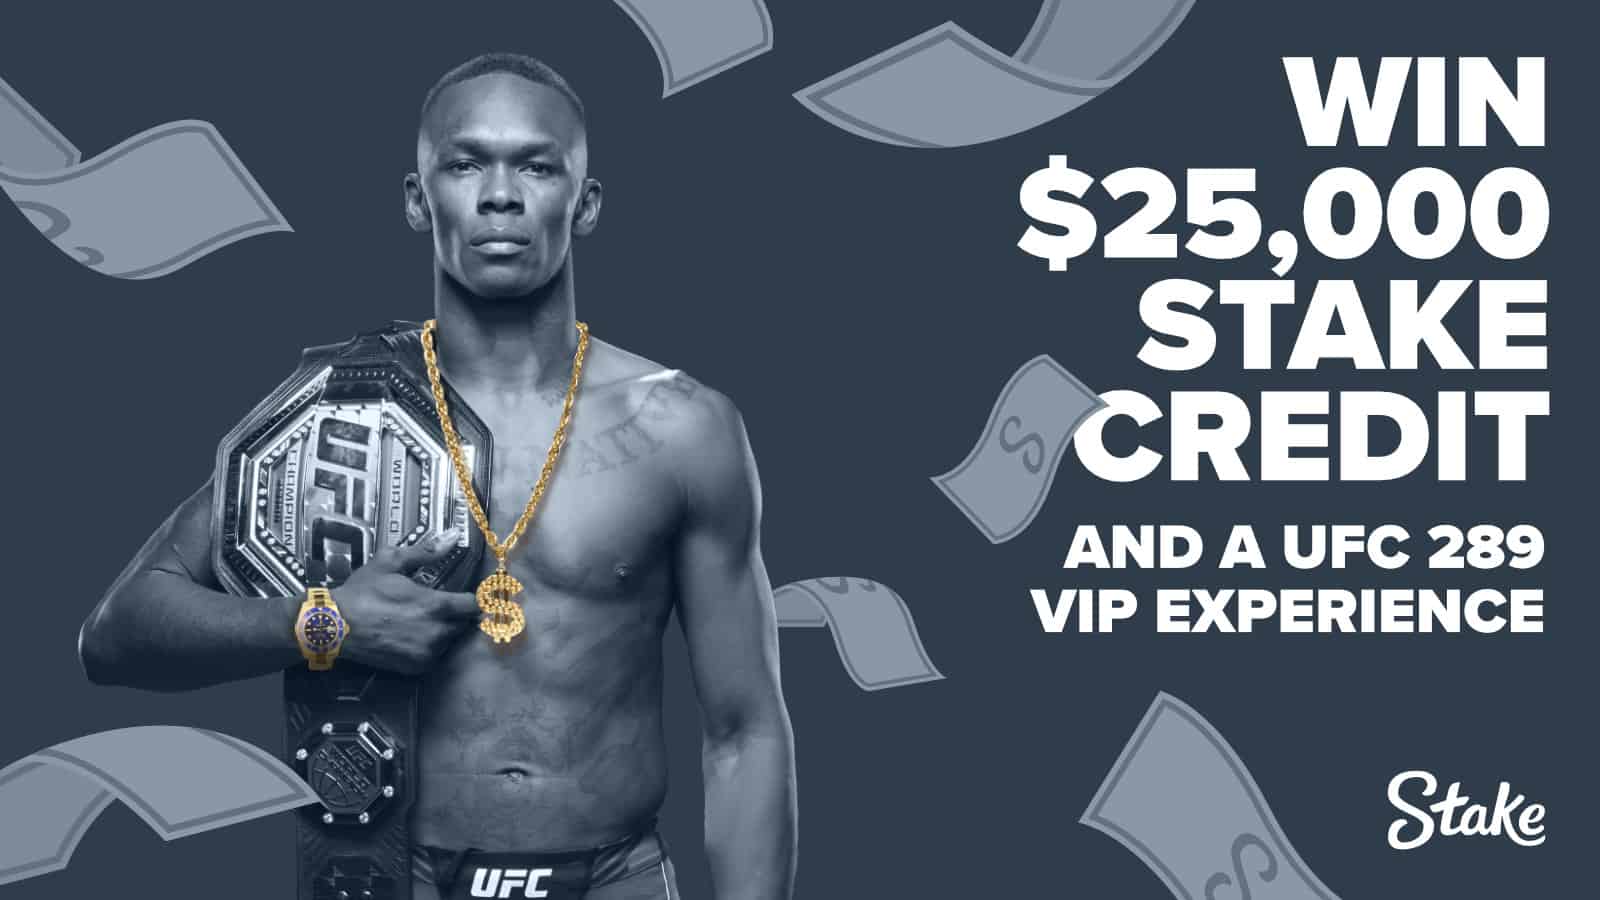 Stake UFC promotion